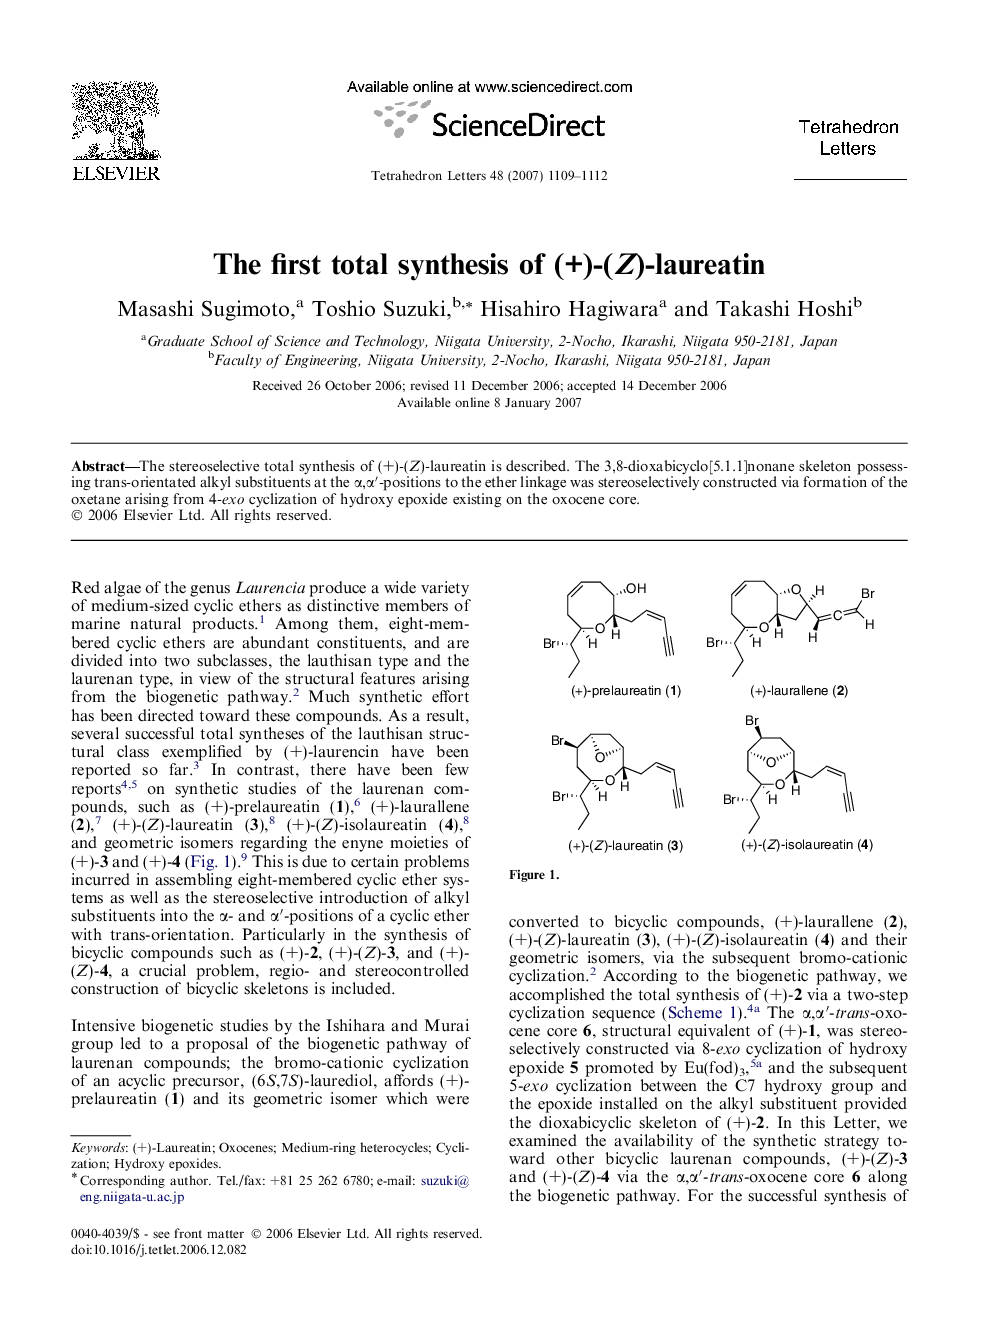 The first total synthesis of (+)-(Z)-laureatin